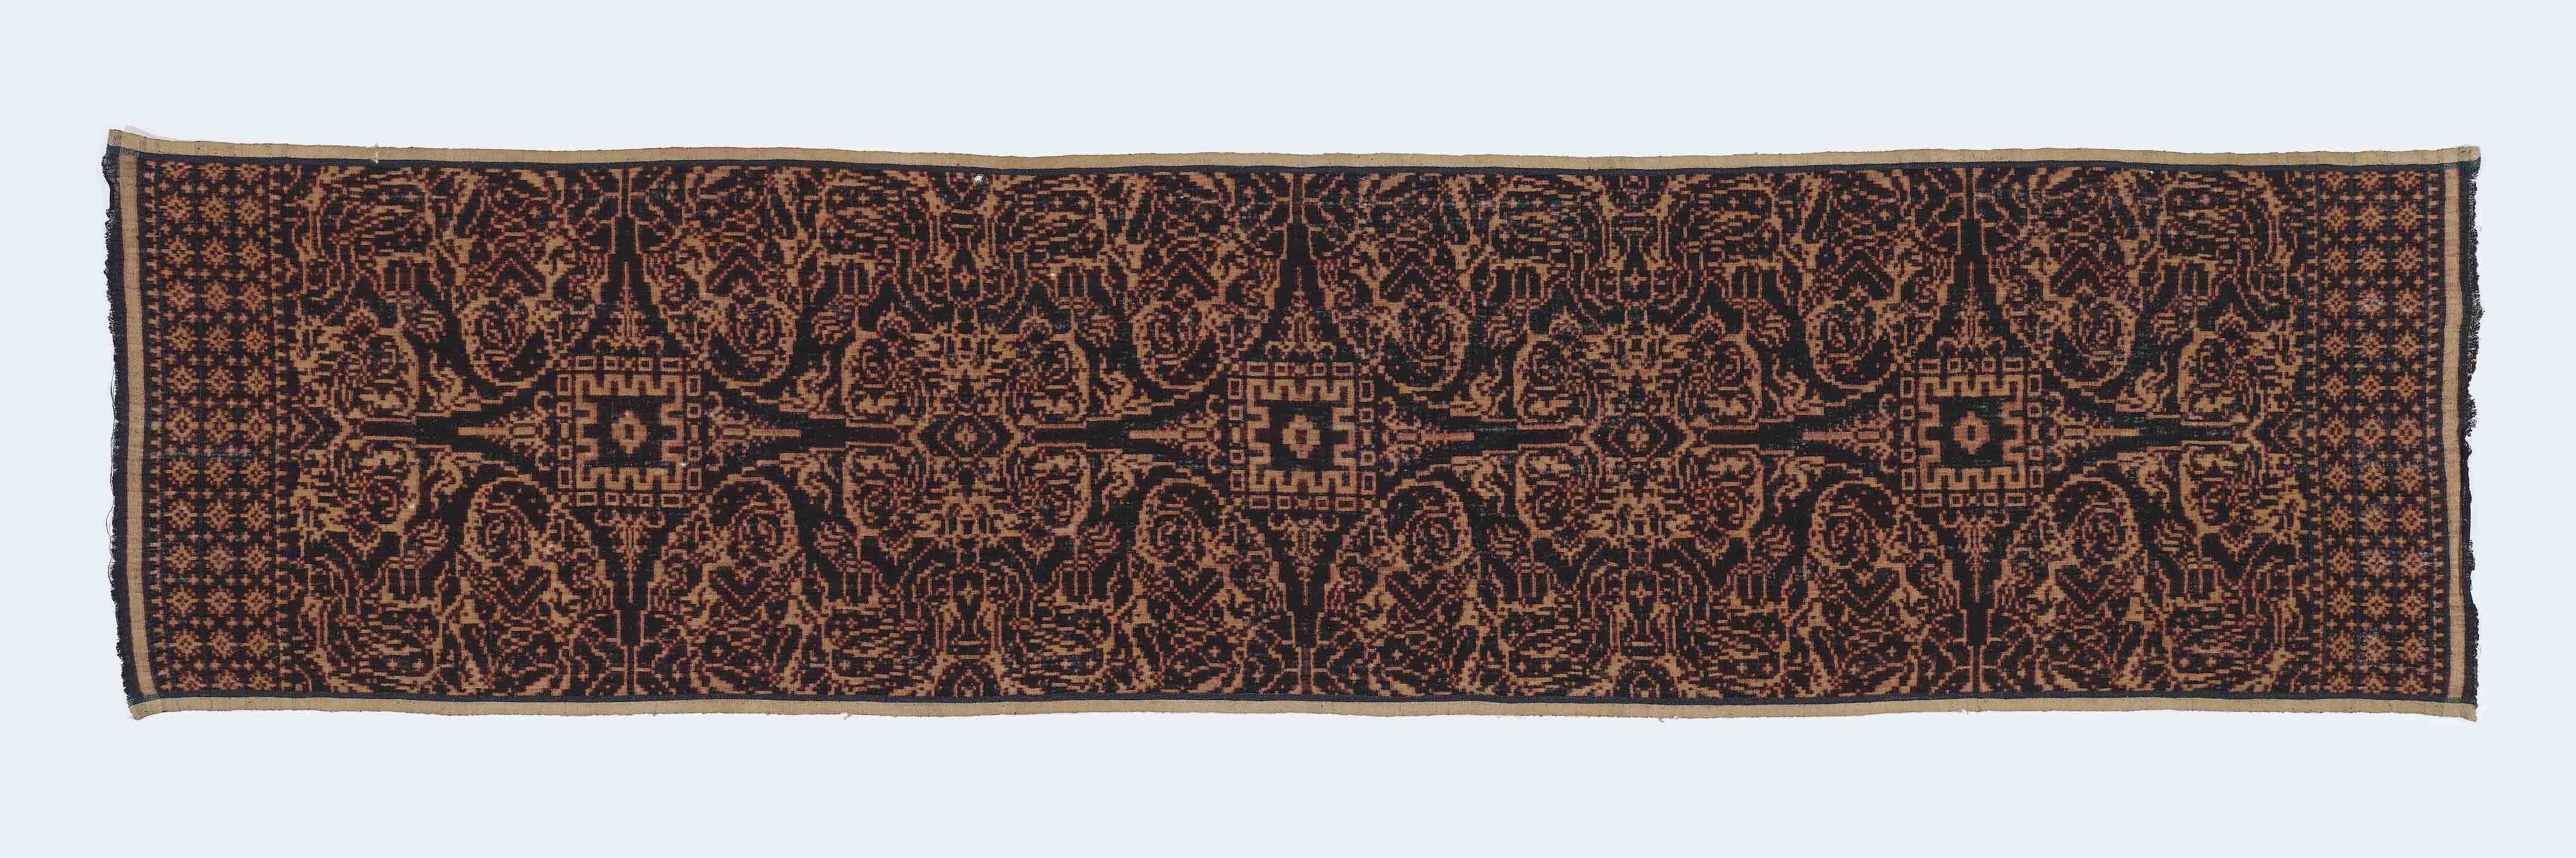 Ceremonial cloth (Geringsing) with figural and geometric patterns 